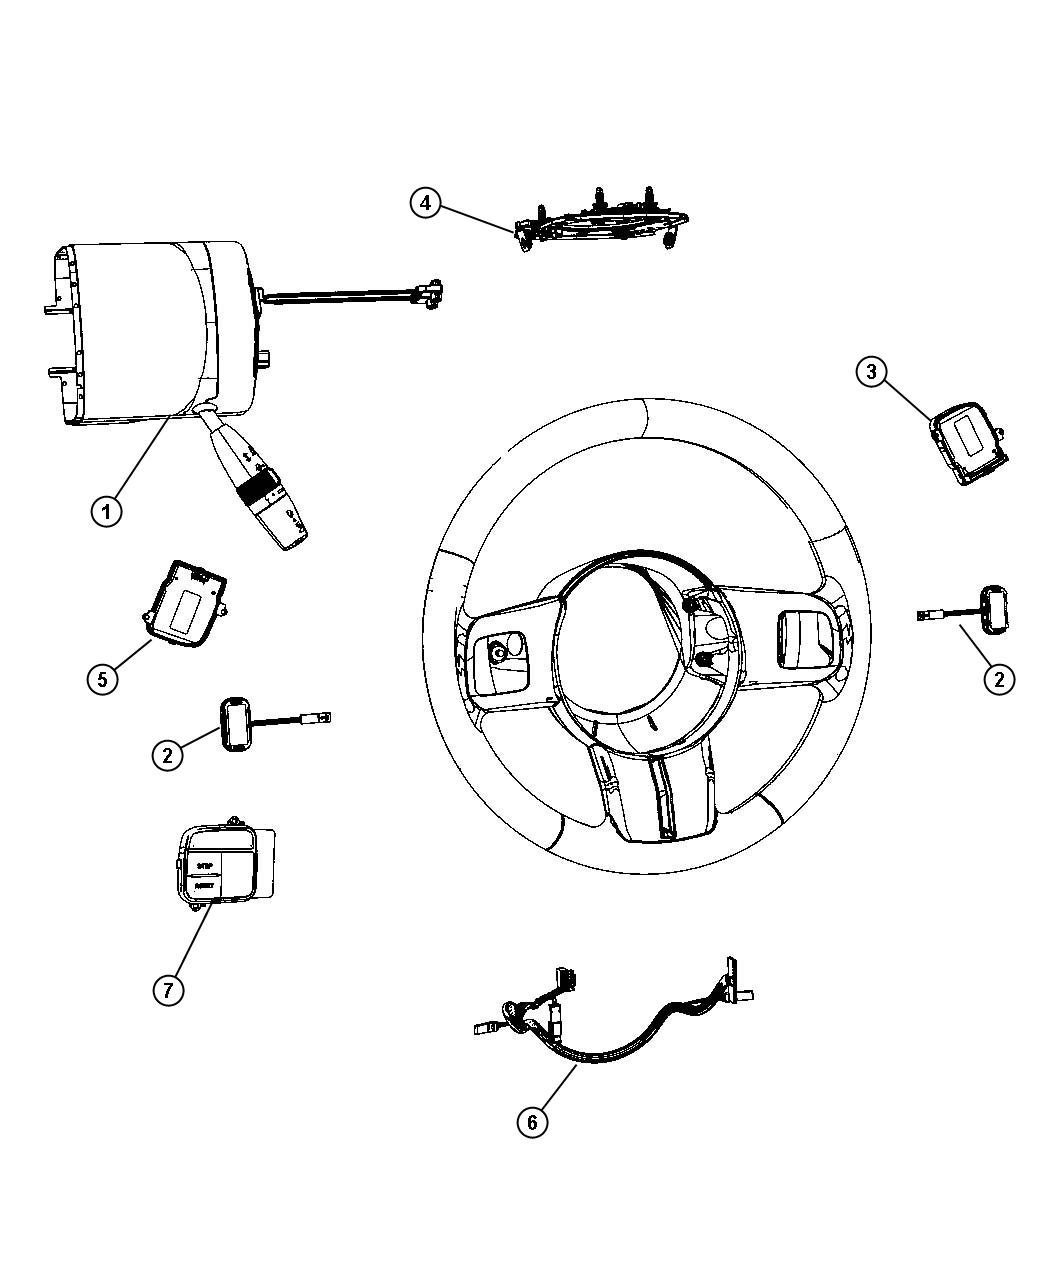 Switches, Steering Column and Wheel. Diagram